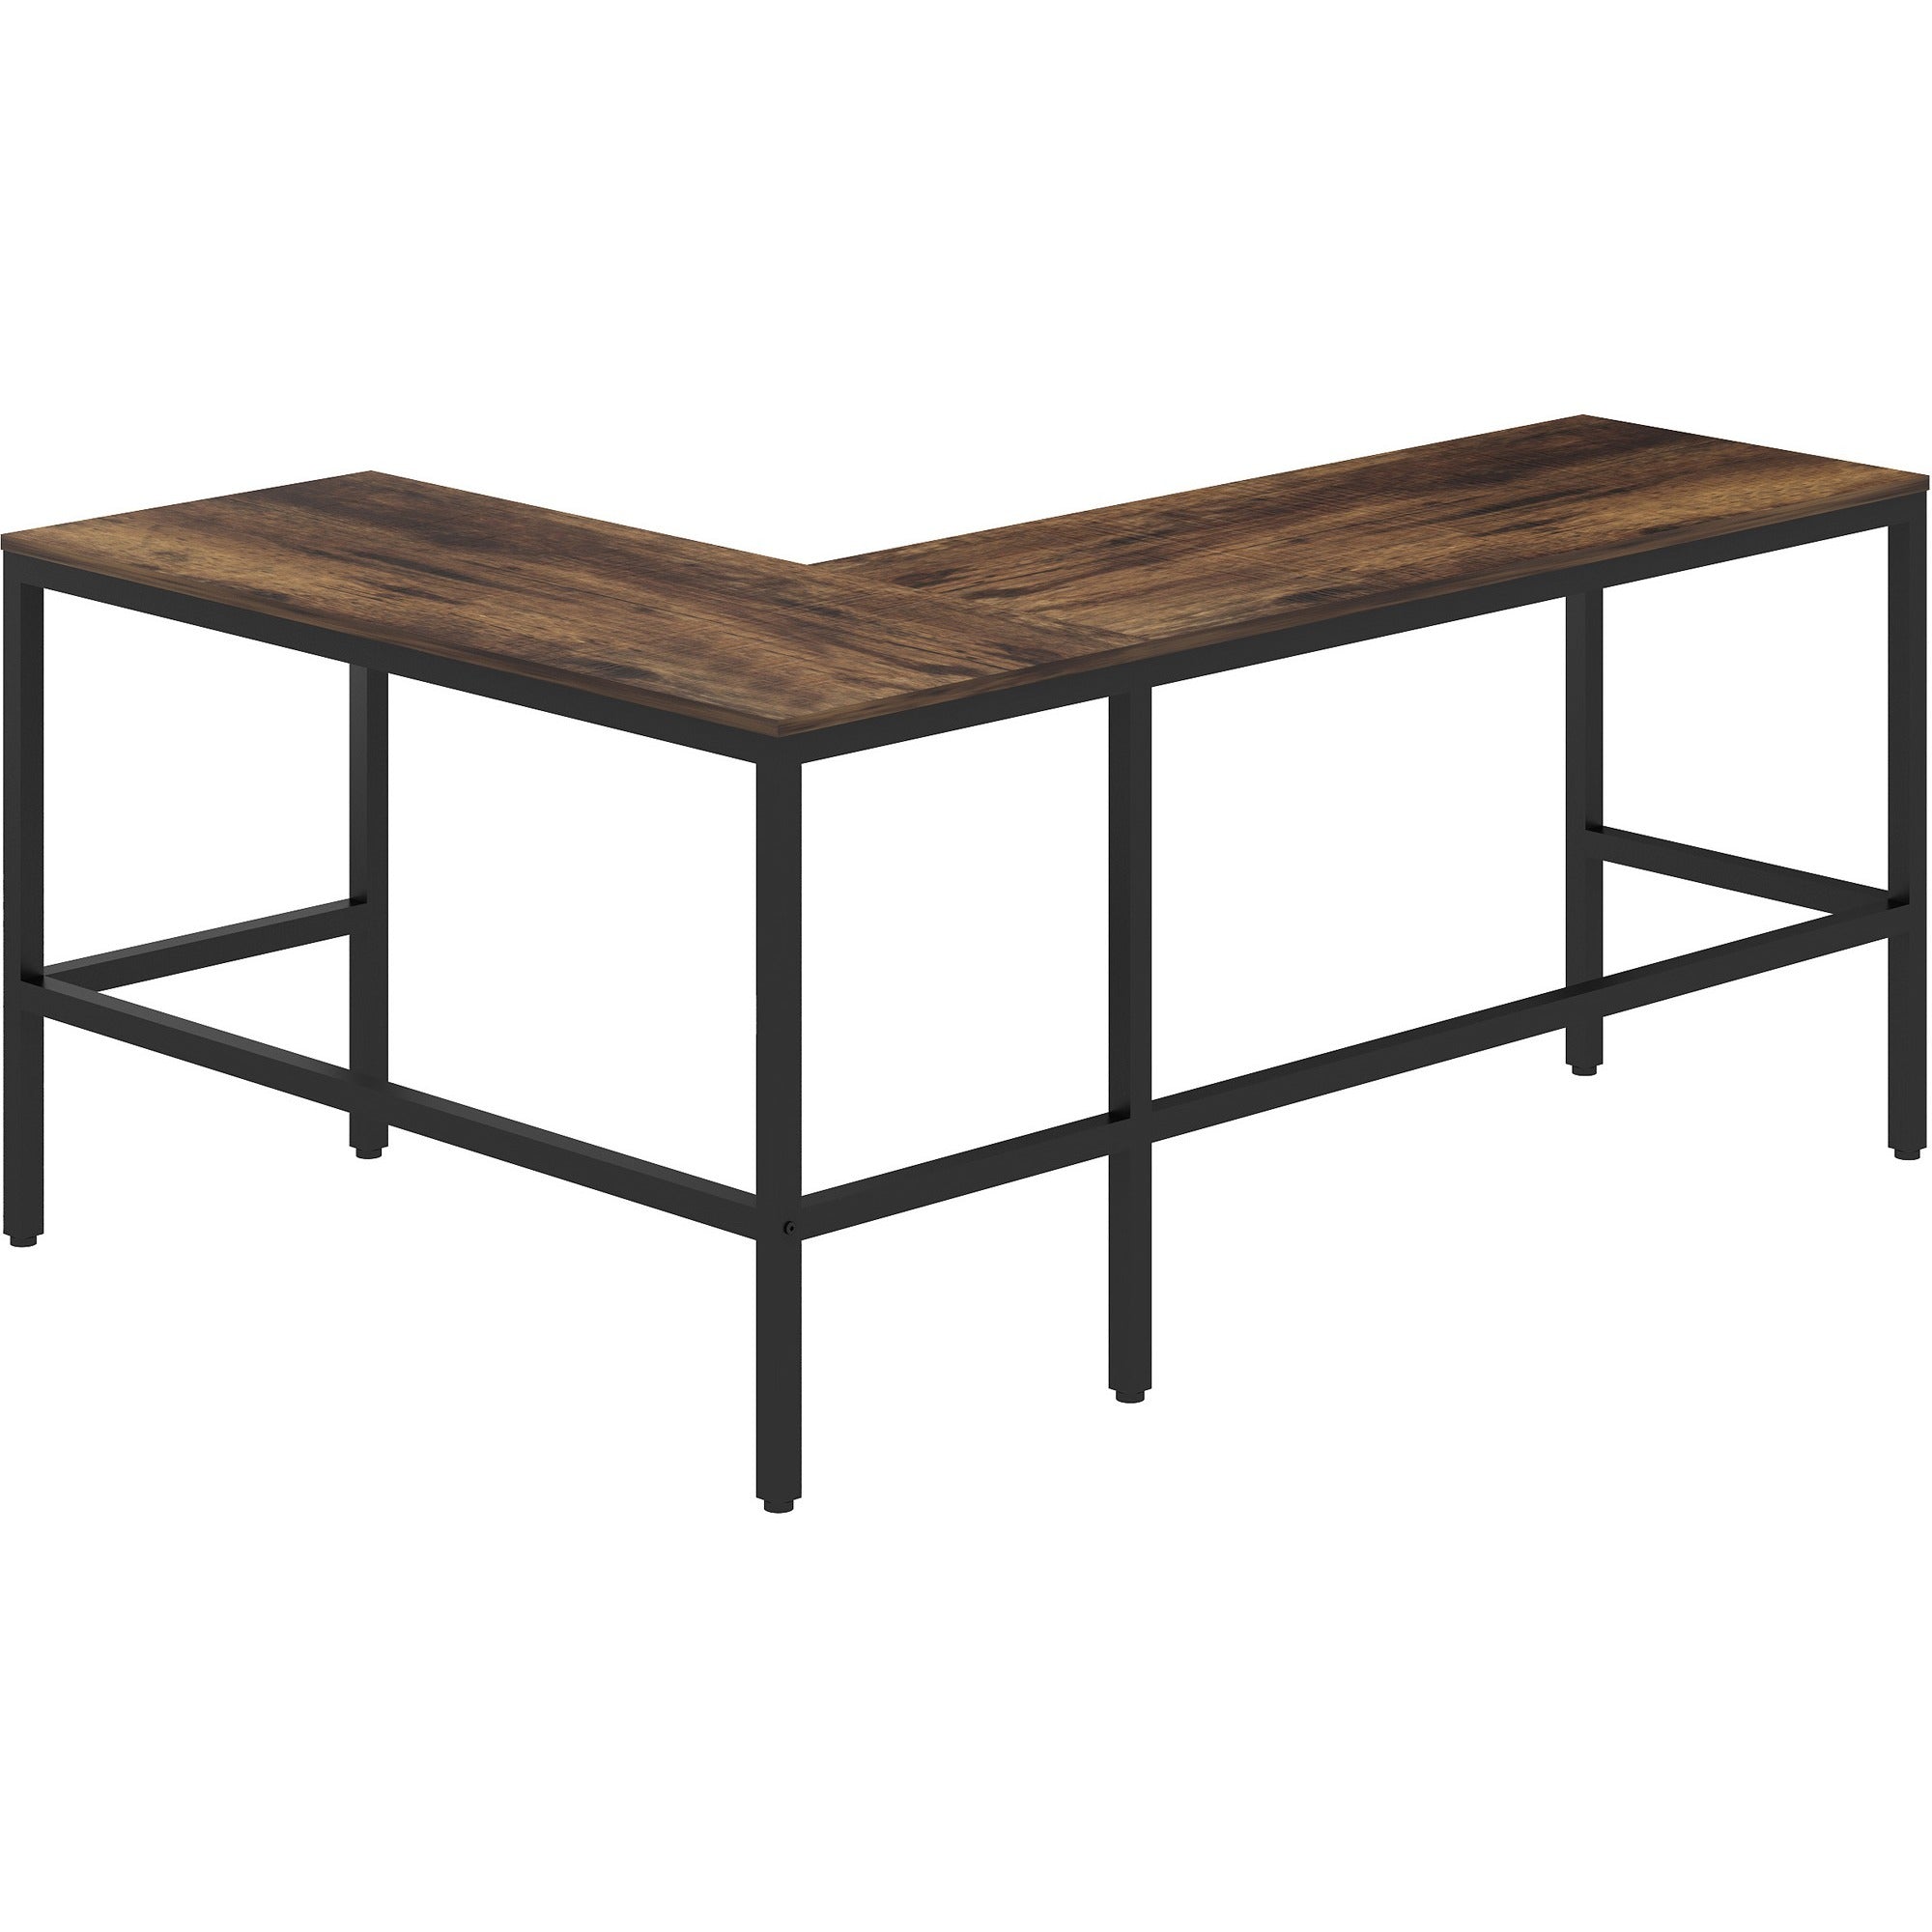 nusparc-l-shaped-metal-frame-desk-for-table-topvintage-oak-l-shaped-black-top-contemporary-style-200-lb-capacity-x-67-table-top-width-x-4720-table-top-depth-x-1-table-top-thickness-2920-height-assembly-required-high-pressure-lami_nprdk102rrrk - 3